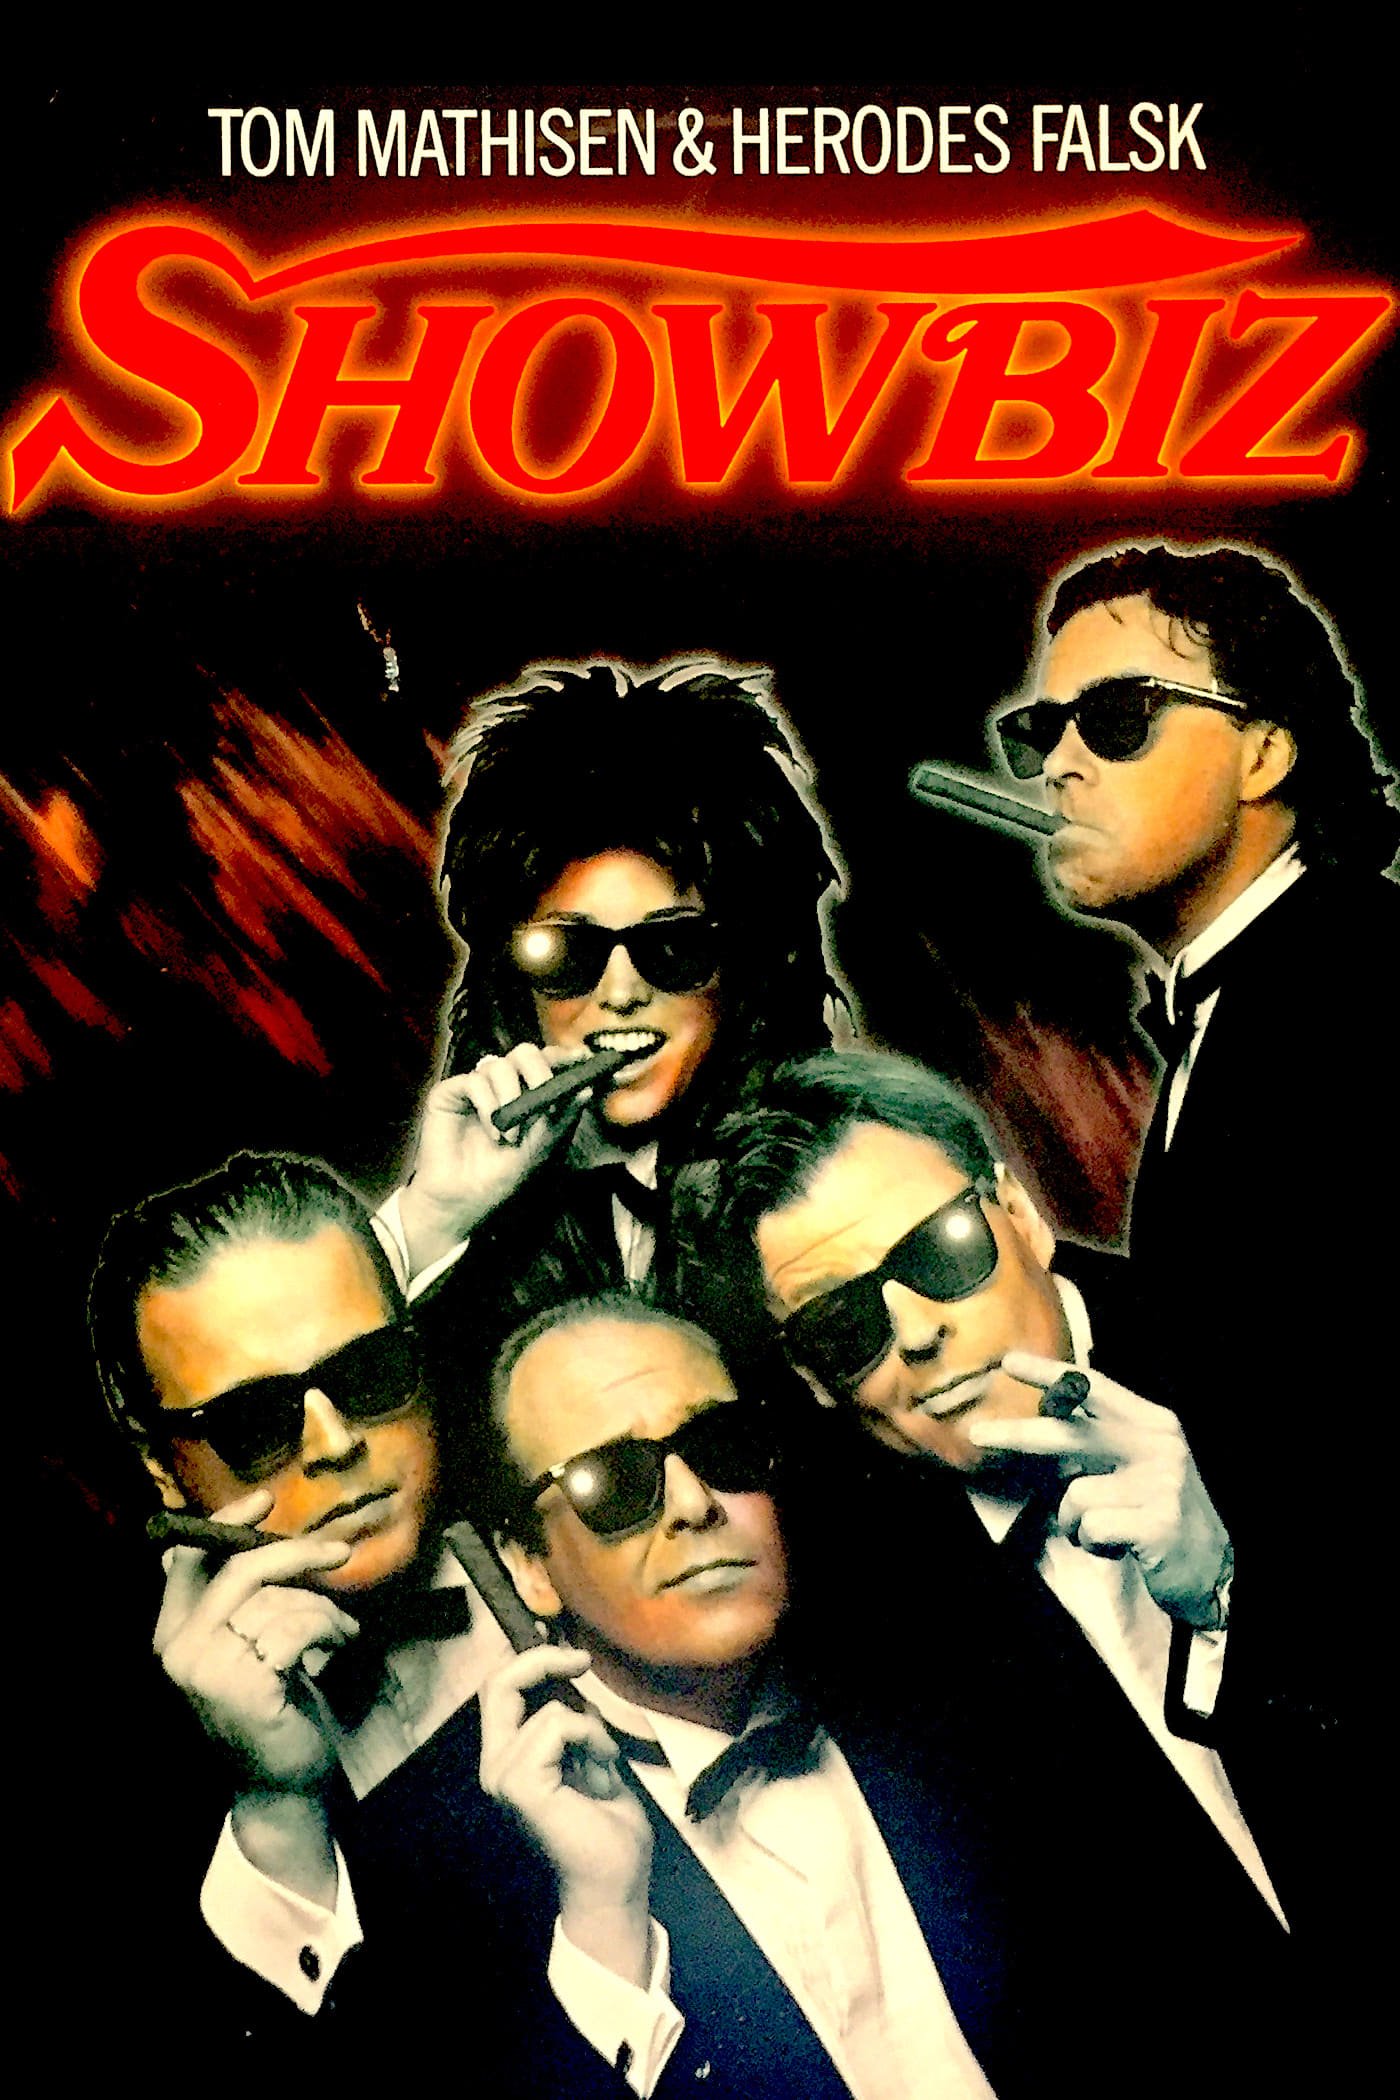 Showbiz: or how to become a celebrity in 1-2-3! (1989)